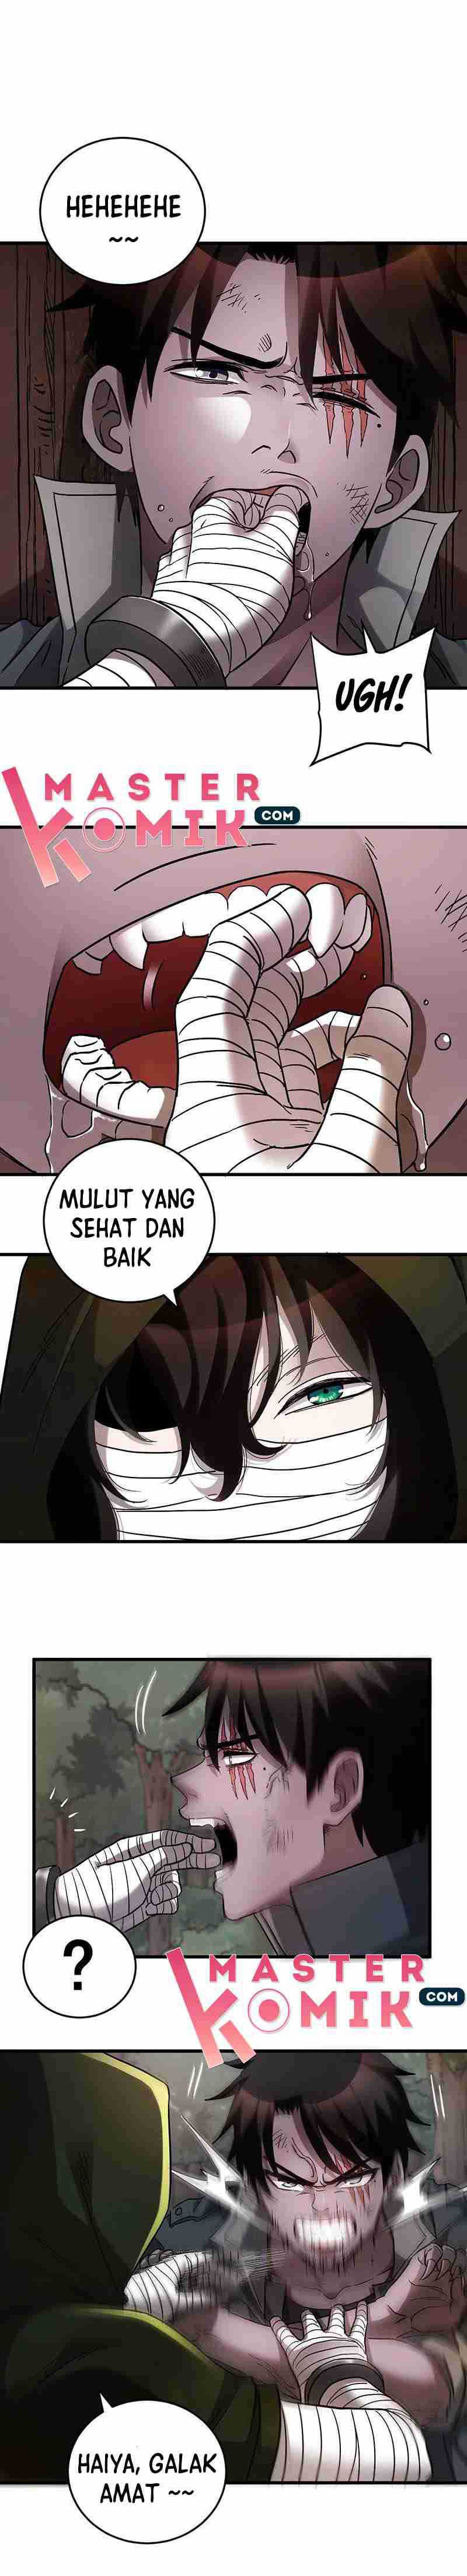 Strongest Evolution Of Zombie Chapter 41